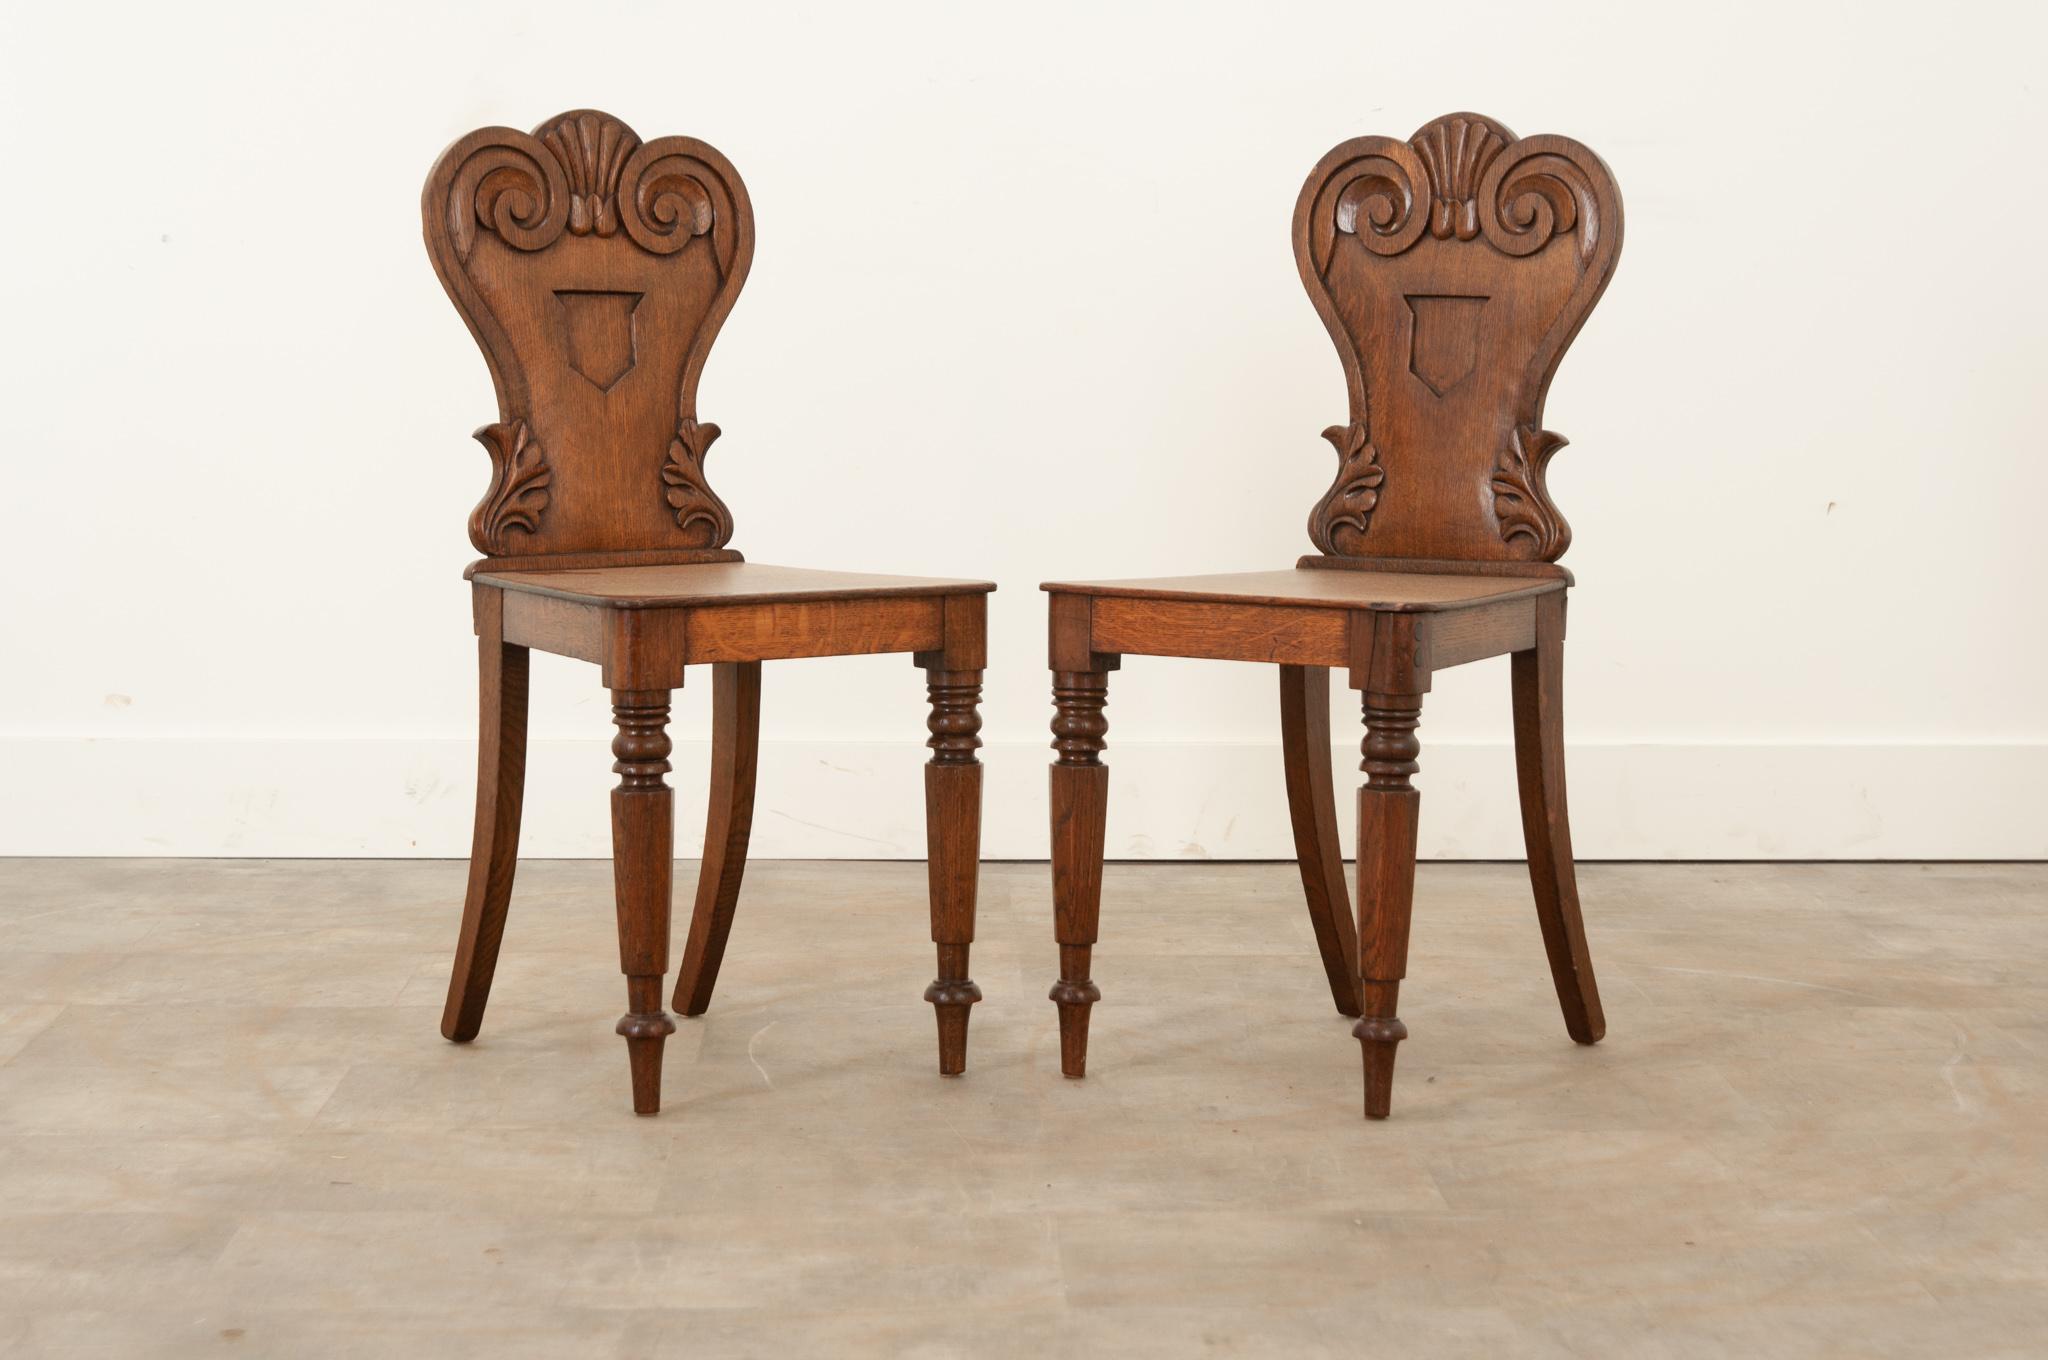 A pair of finely crafted solid oak English hall chairs from the 19th century. The shapely back showcases scrolling and shell inspired hand-carved elements at the top, a recessed shield form in the center, and acanthus leaves. Sturdy and level, they